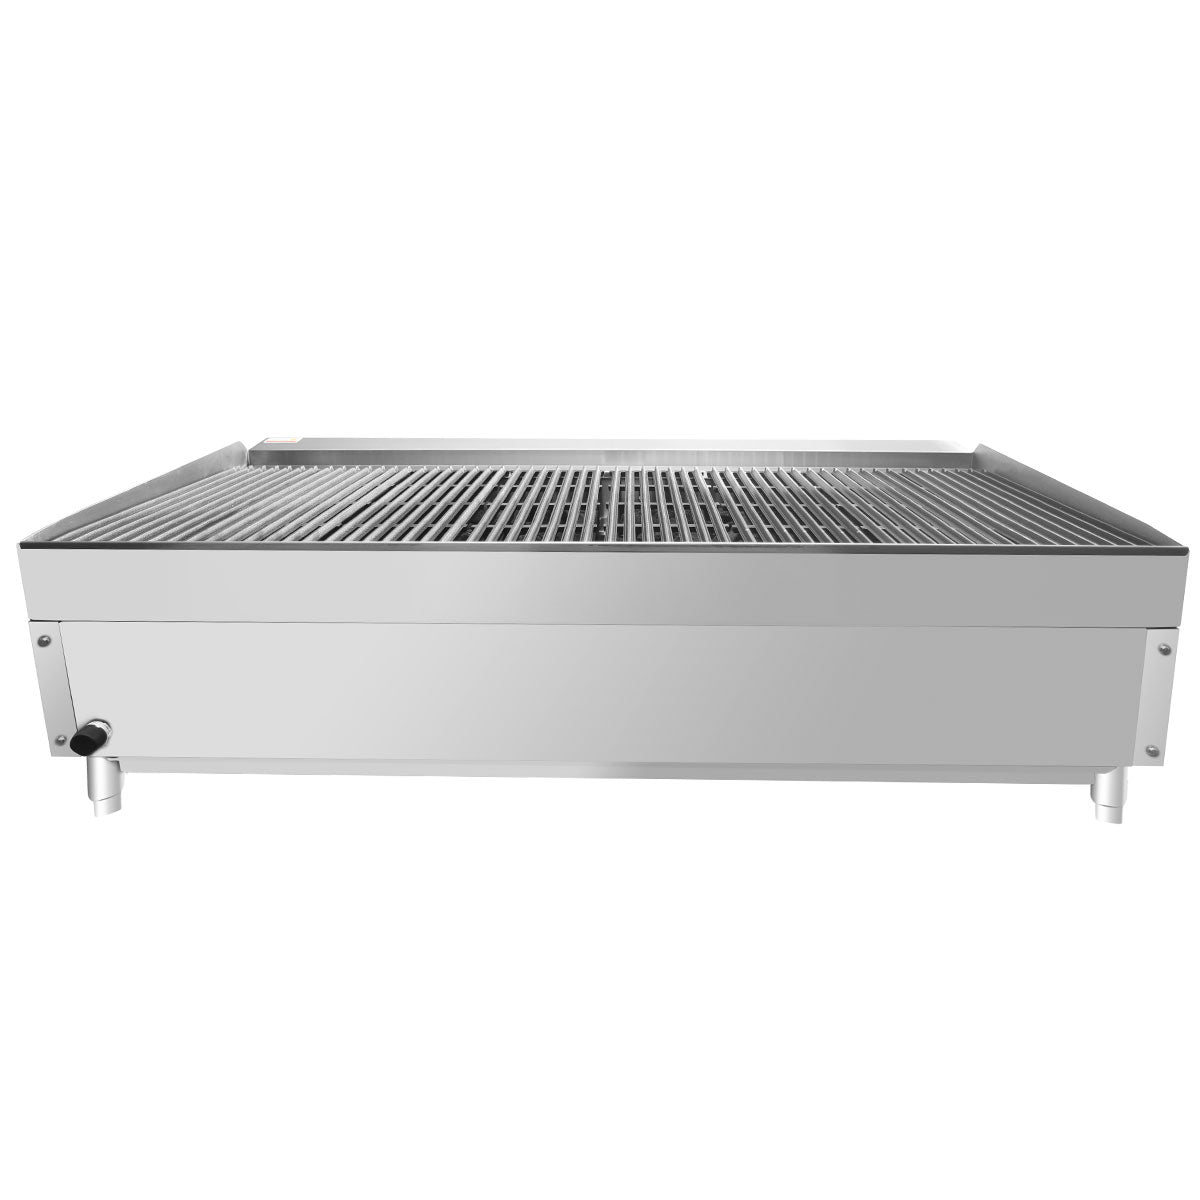 Atosa ATRC-48* HD 48'' Radiant Broiler with Total 140,000 B.T.U.